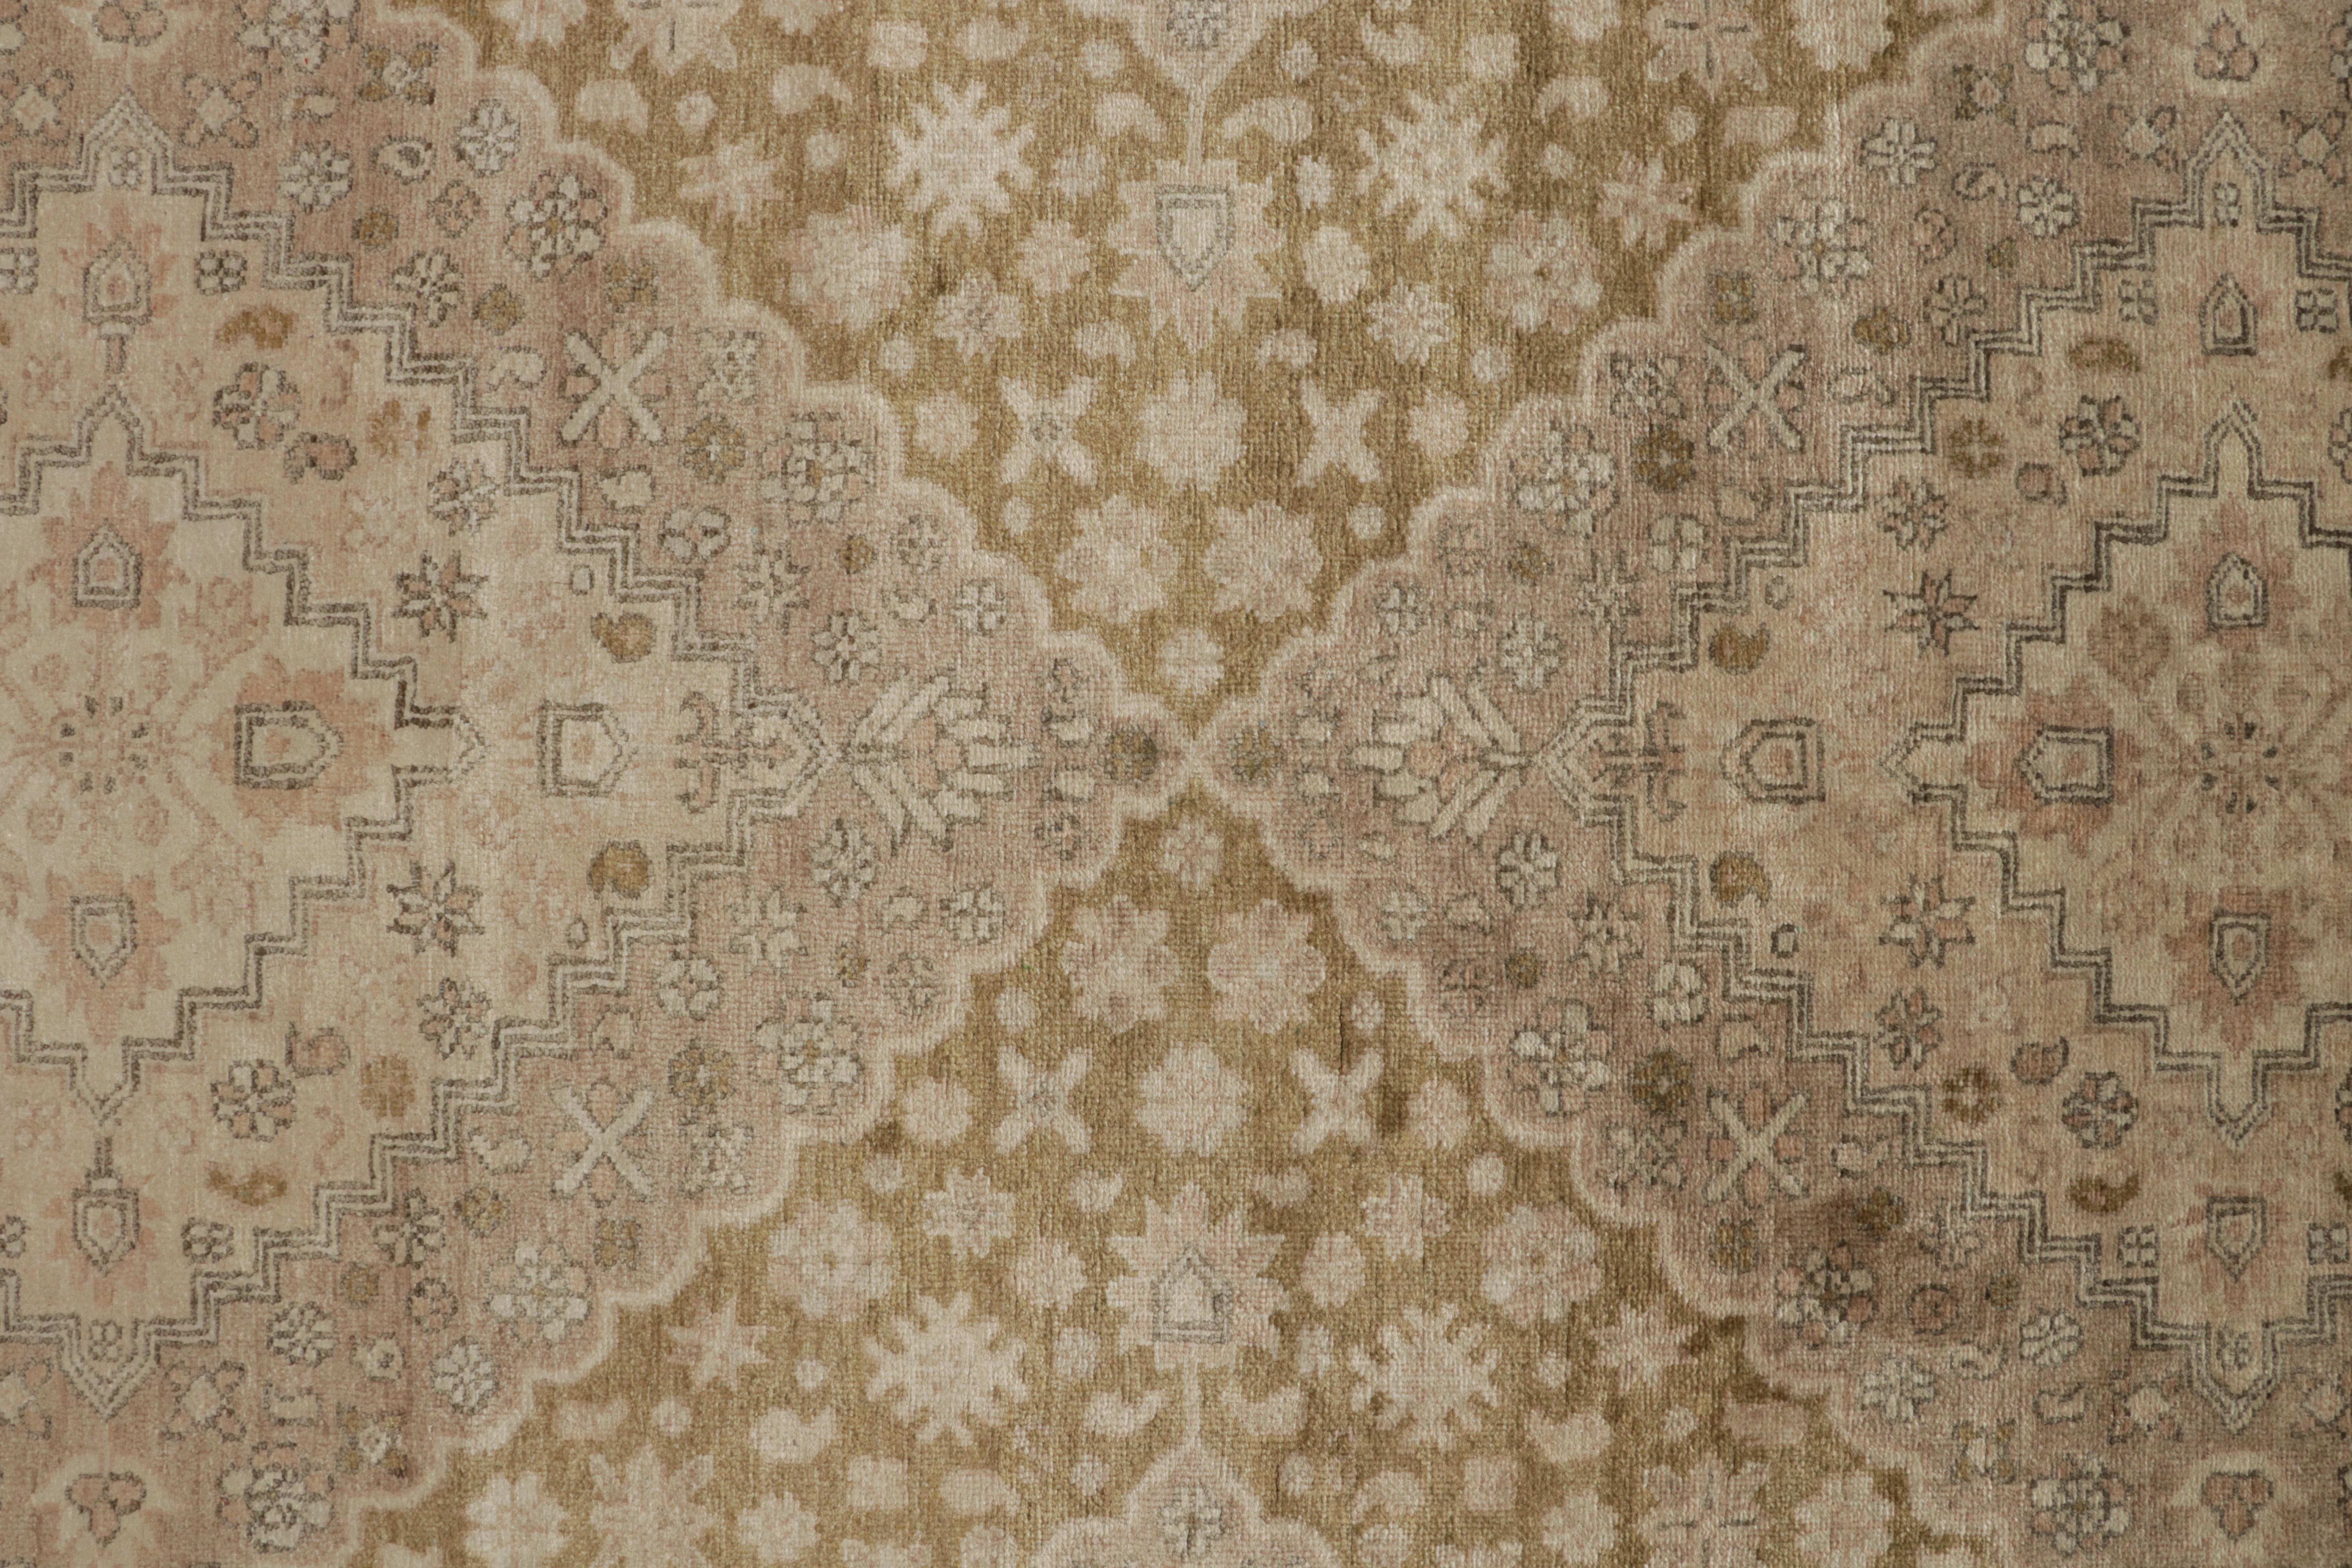 Contemporary Rug & Kilim’s Classic Khotan Style Rug in Beige & Pink Diamonds, Floral Patterns For Sale